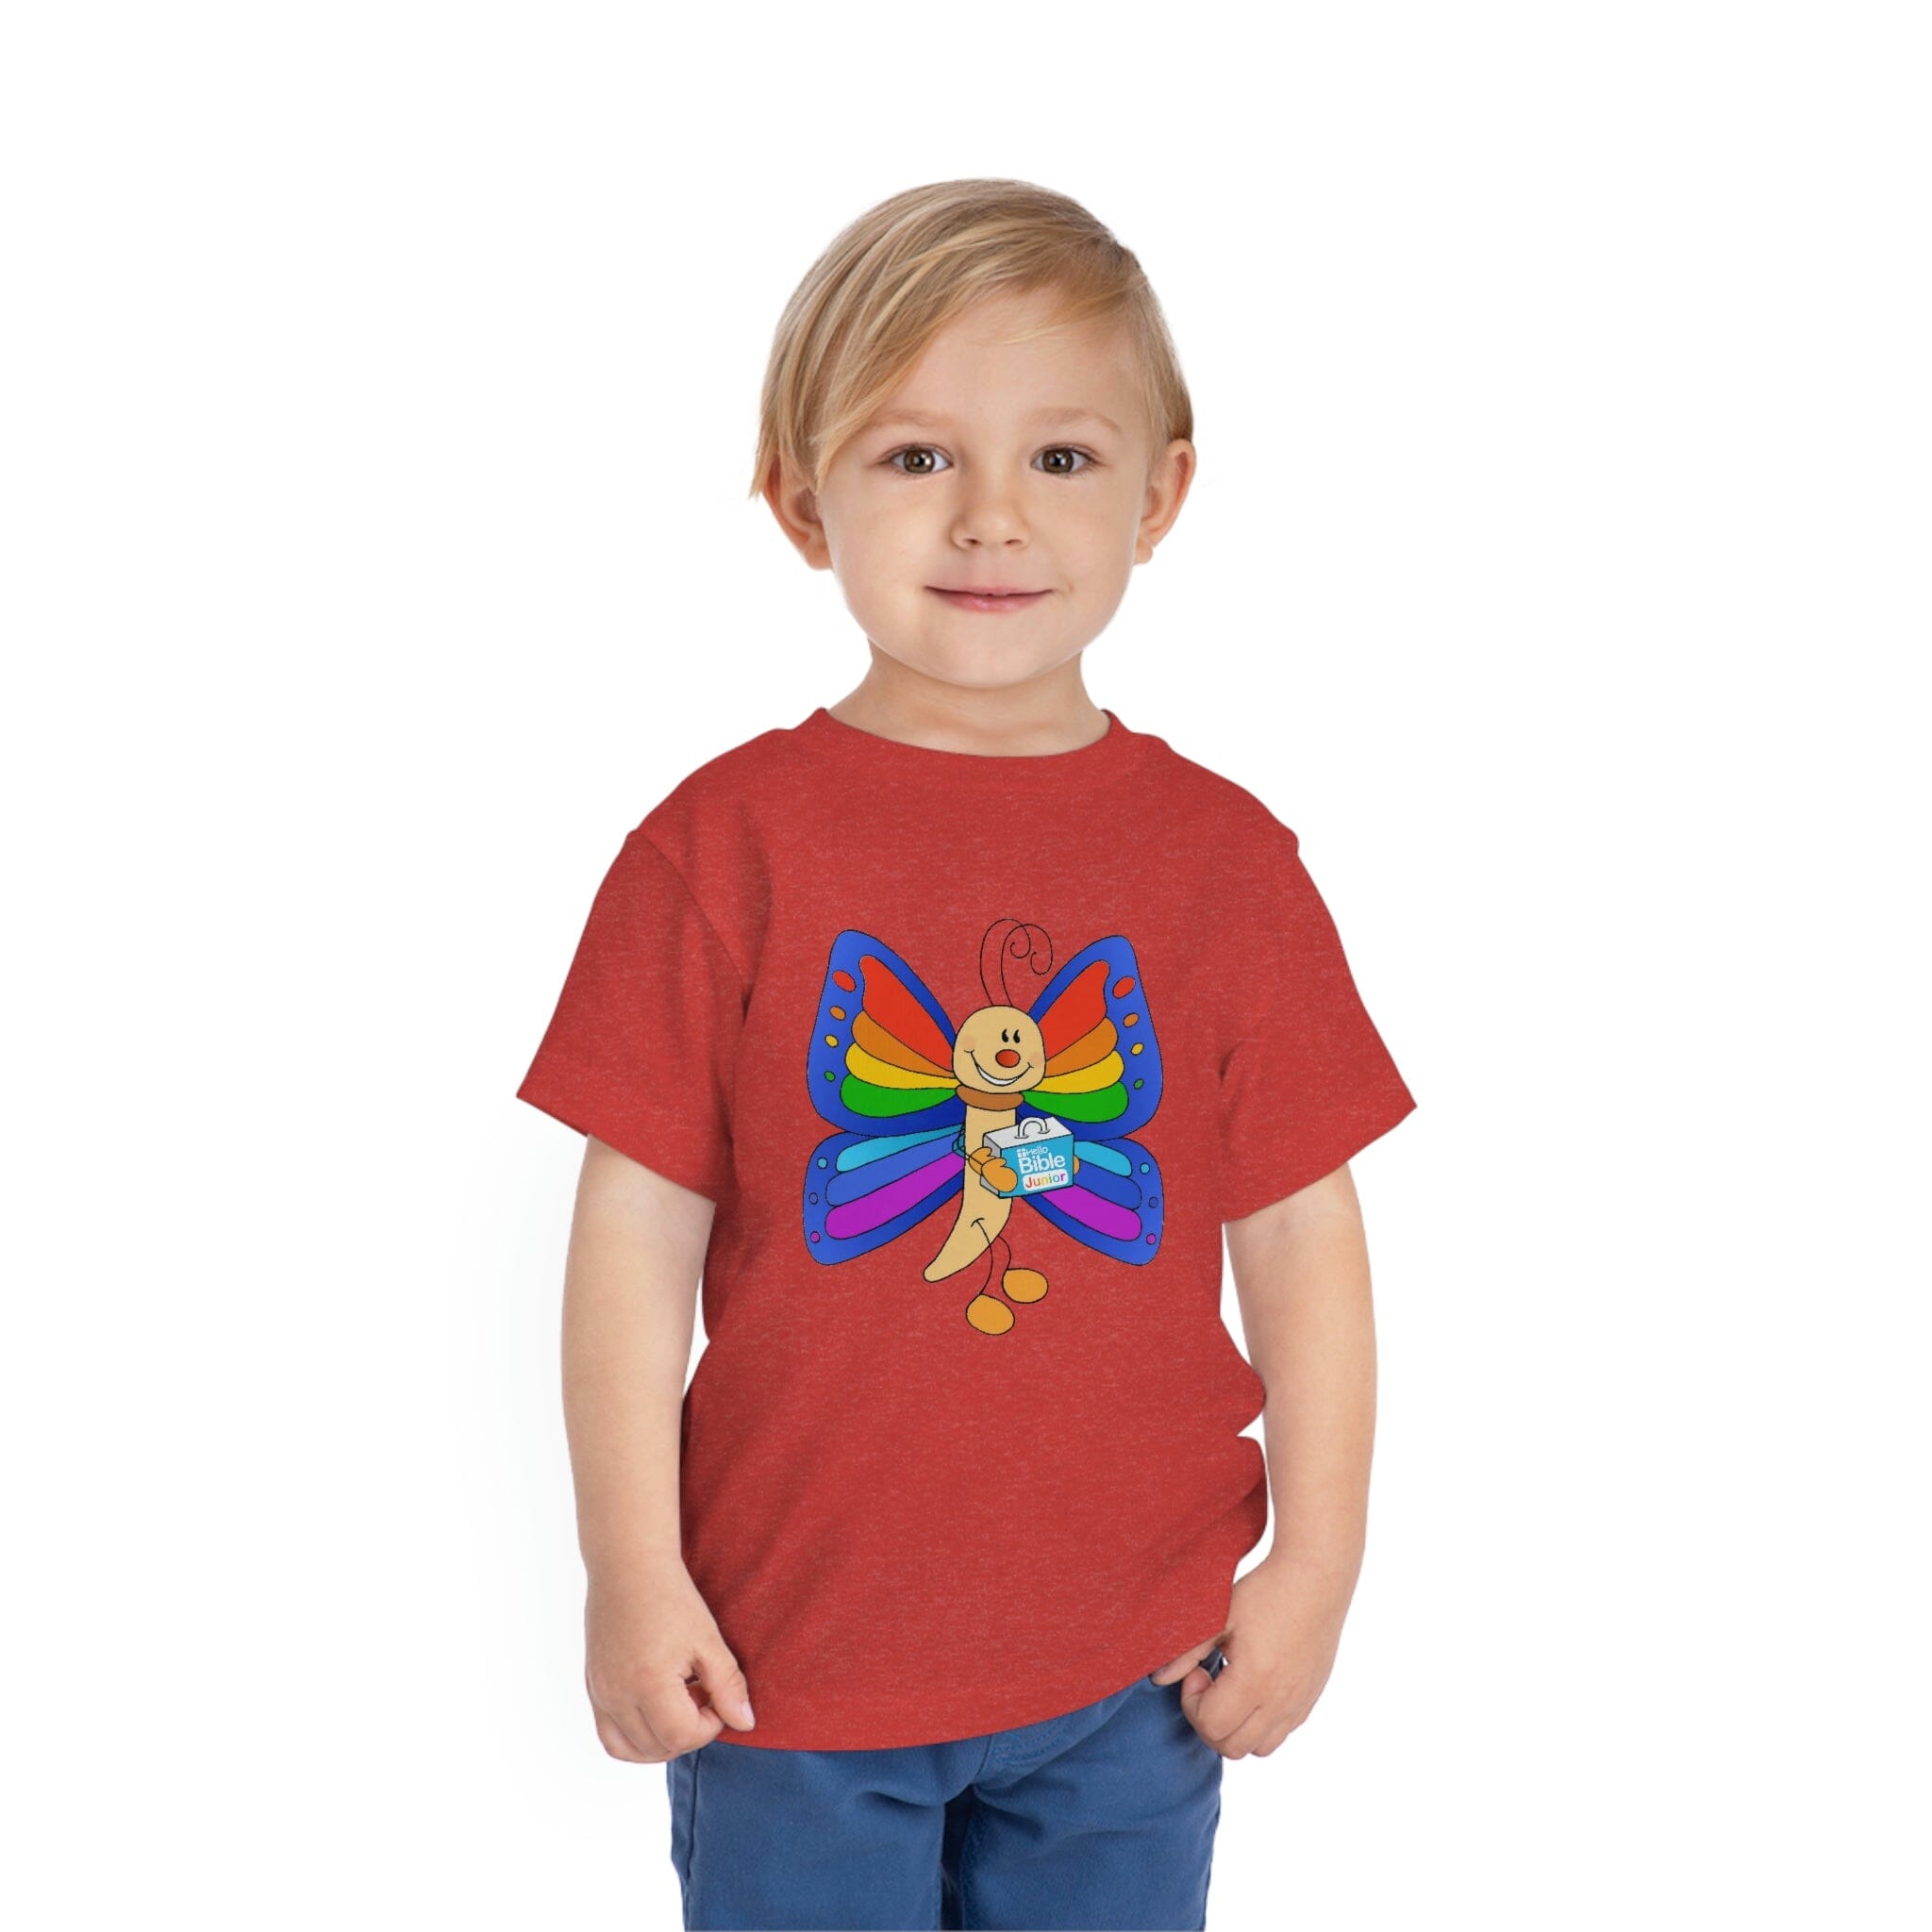 "Bella the Butterfly" HelloBible Toddler Short Sleeve Tee